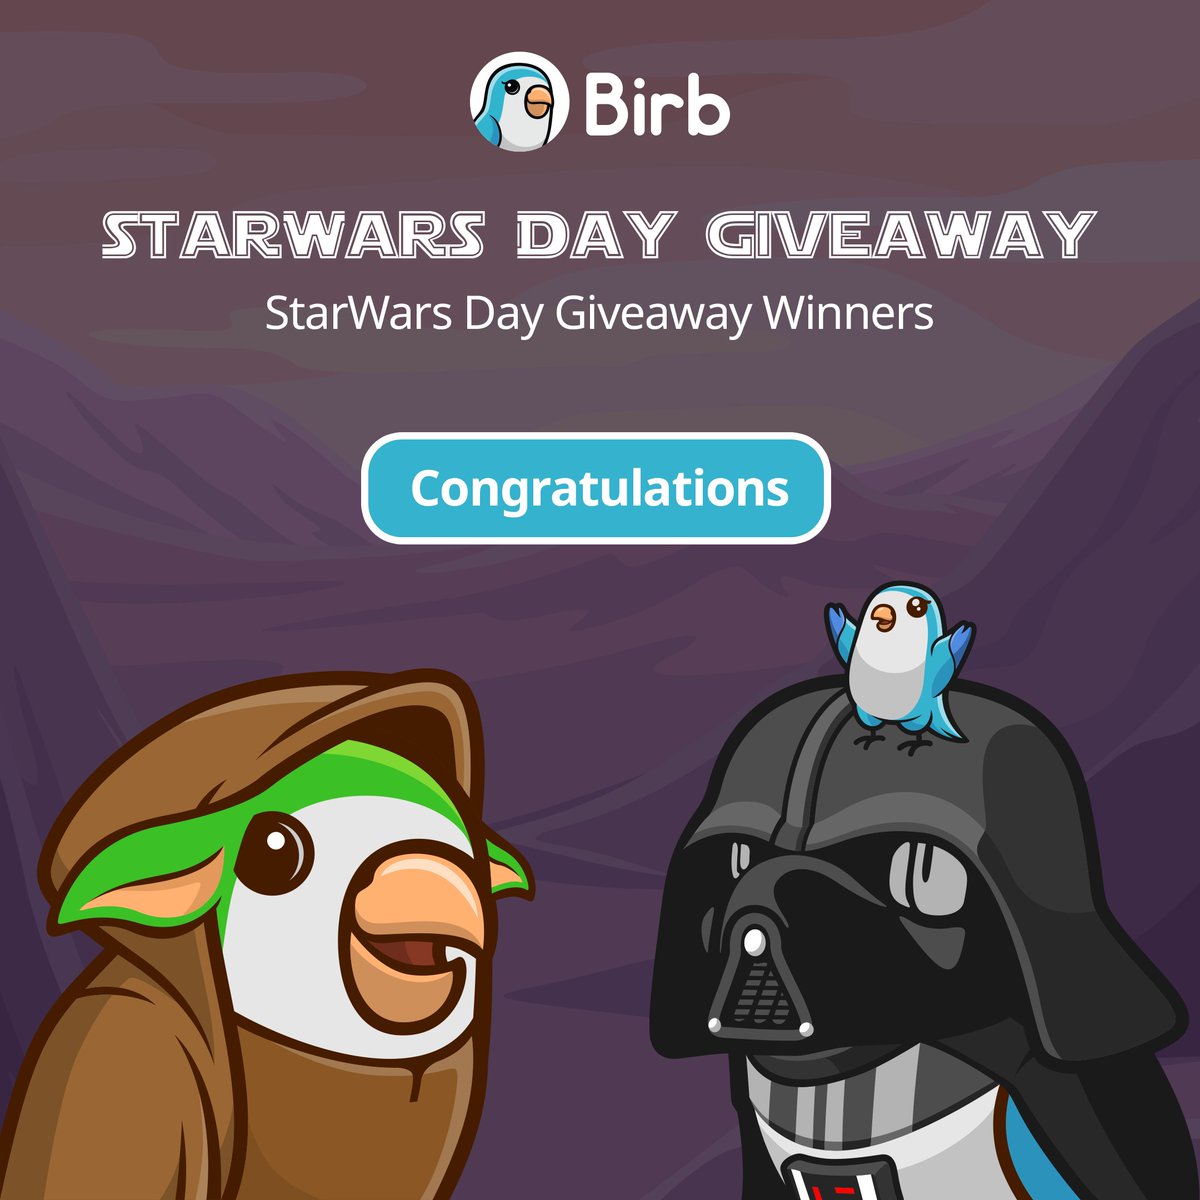 🎉🐦 Huge congrats to the 5 winners of our Birb May 4th giveaway! Each winner gets $5 in BUSD! 🚀 Winners: 1️⃣ @Greek_ETH 2️⃣ @masyokdrops 3️⃣ @leeleicester11 4️⃣ @JustOneVictor 5️⃣ @AntoGanjel 👀 Check your DMs for prize claiming details! 📩 ✅ Verify winners:…